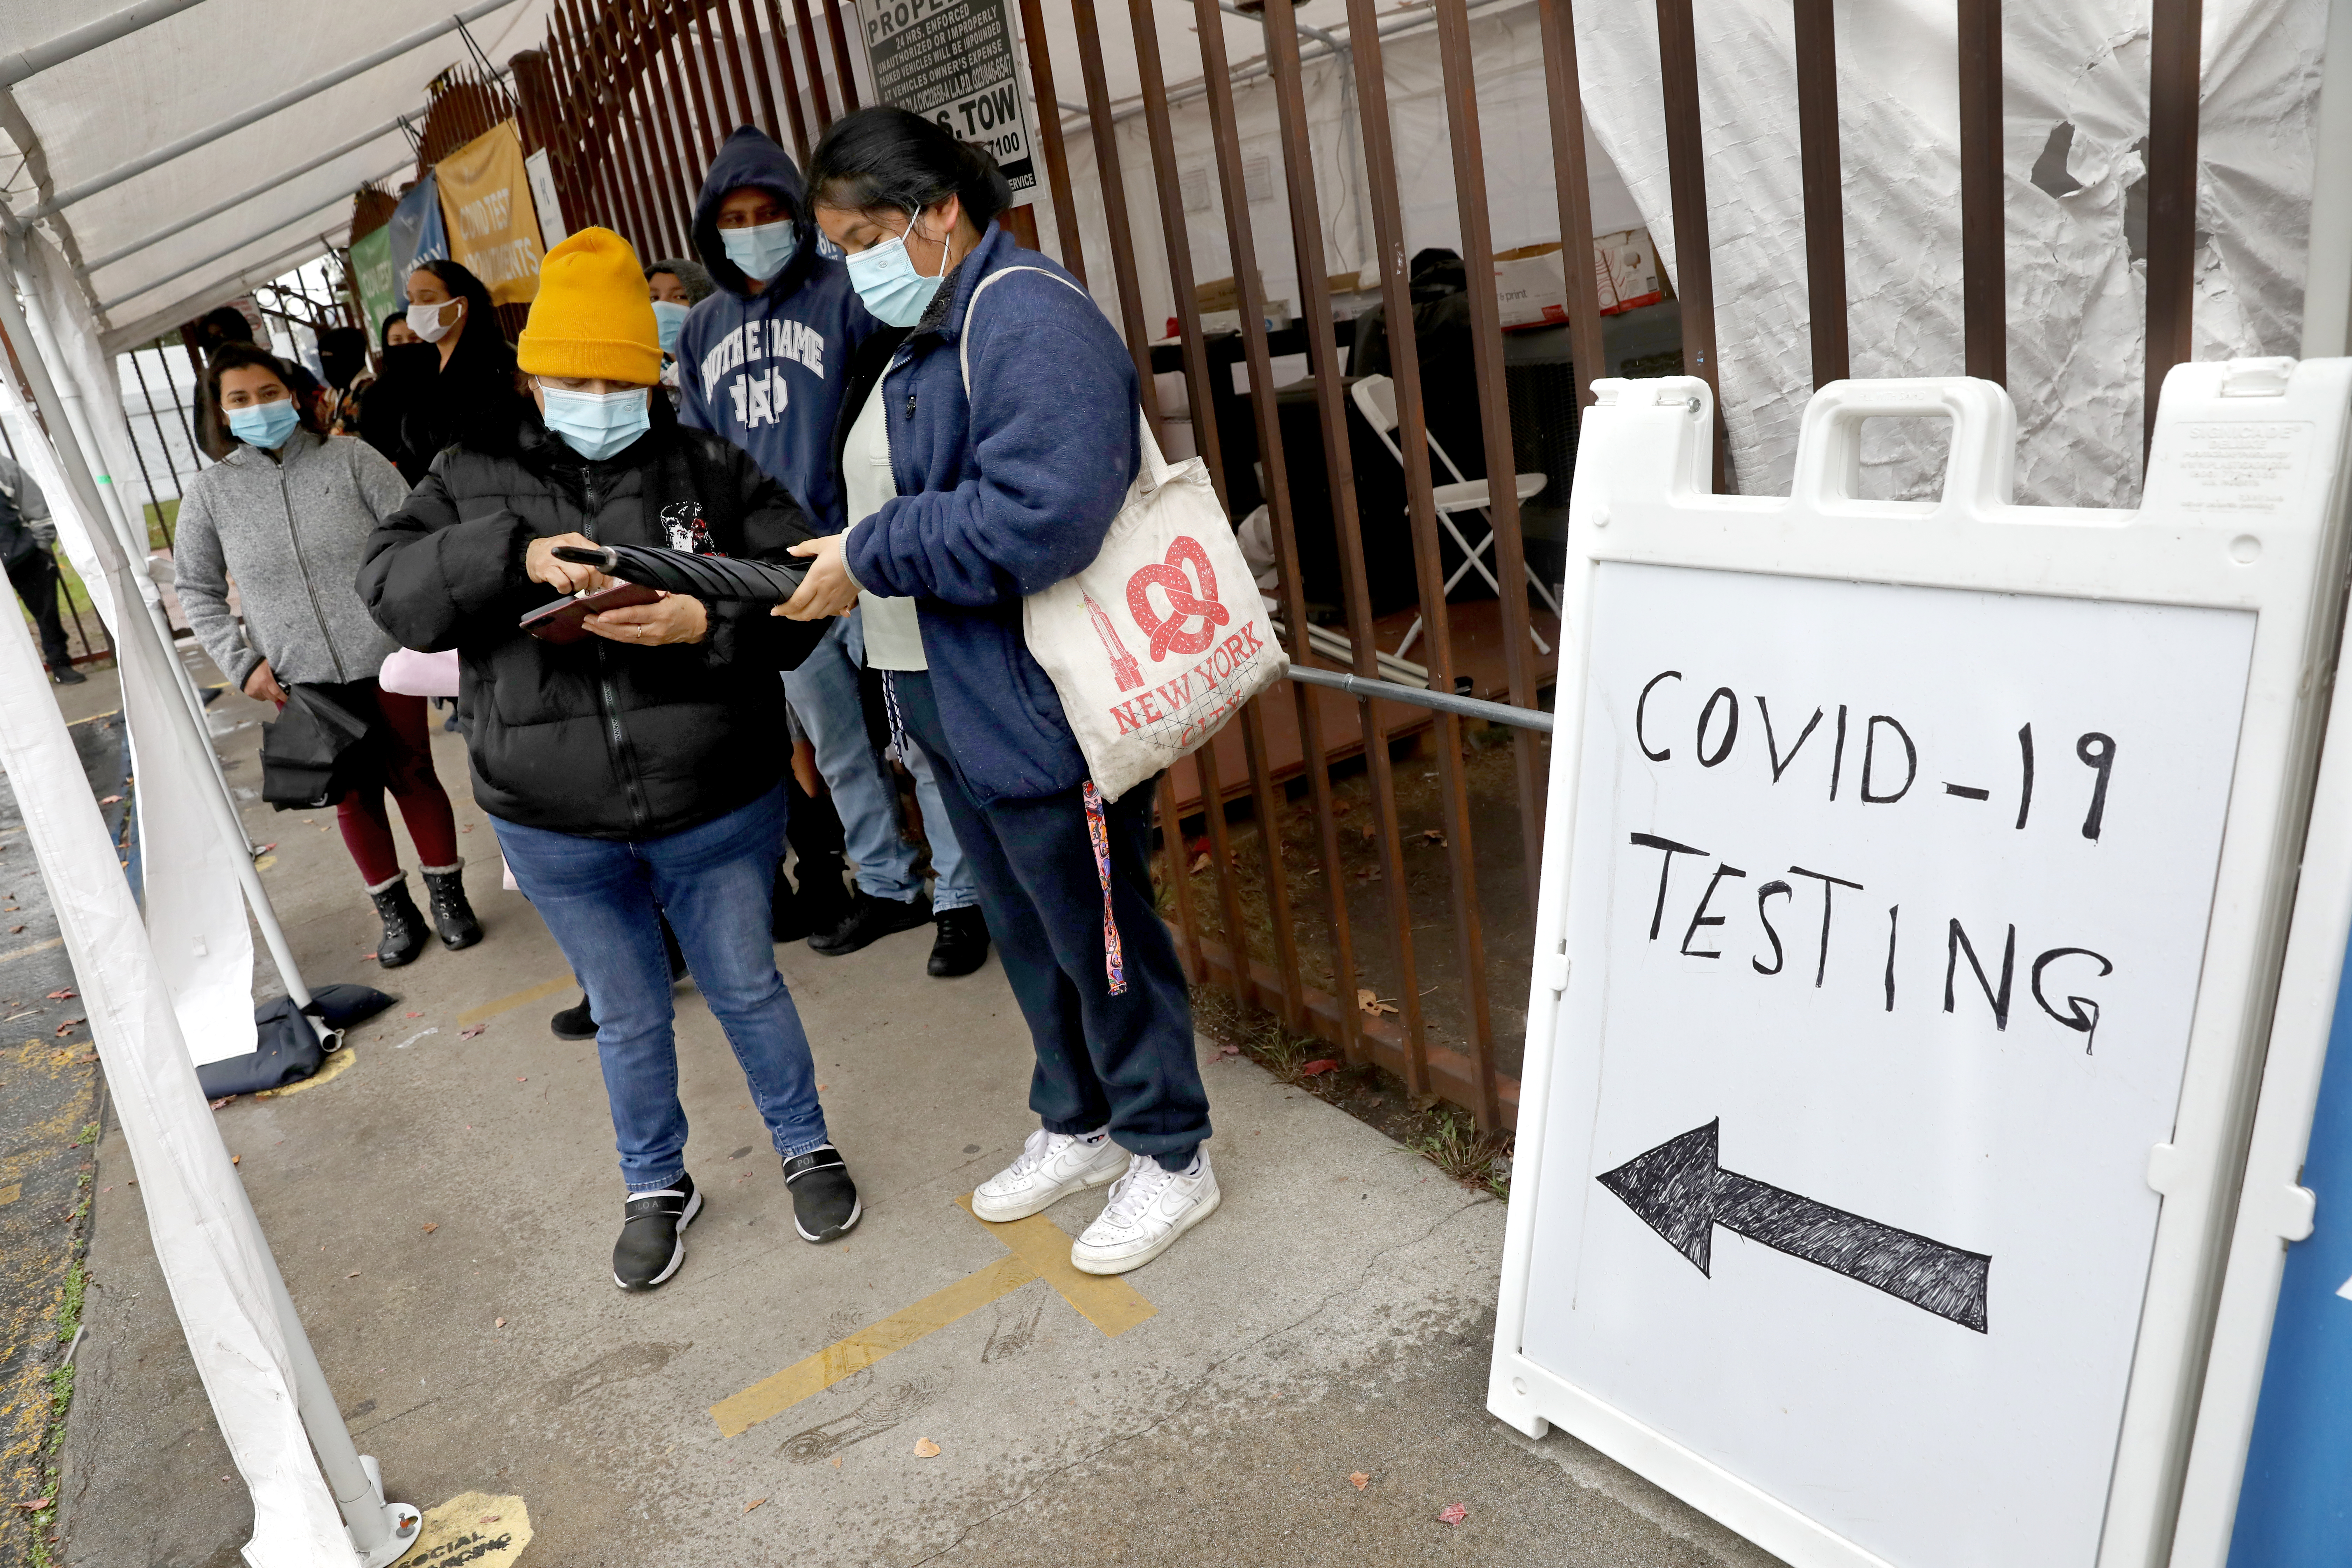 An L.A. company promised COVID test results in 24 hours. In a Theranos-like twist, when it couldn't produce, it lied, authorities allege